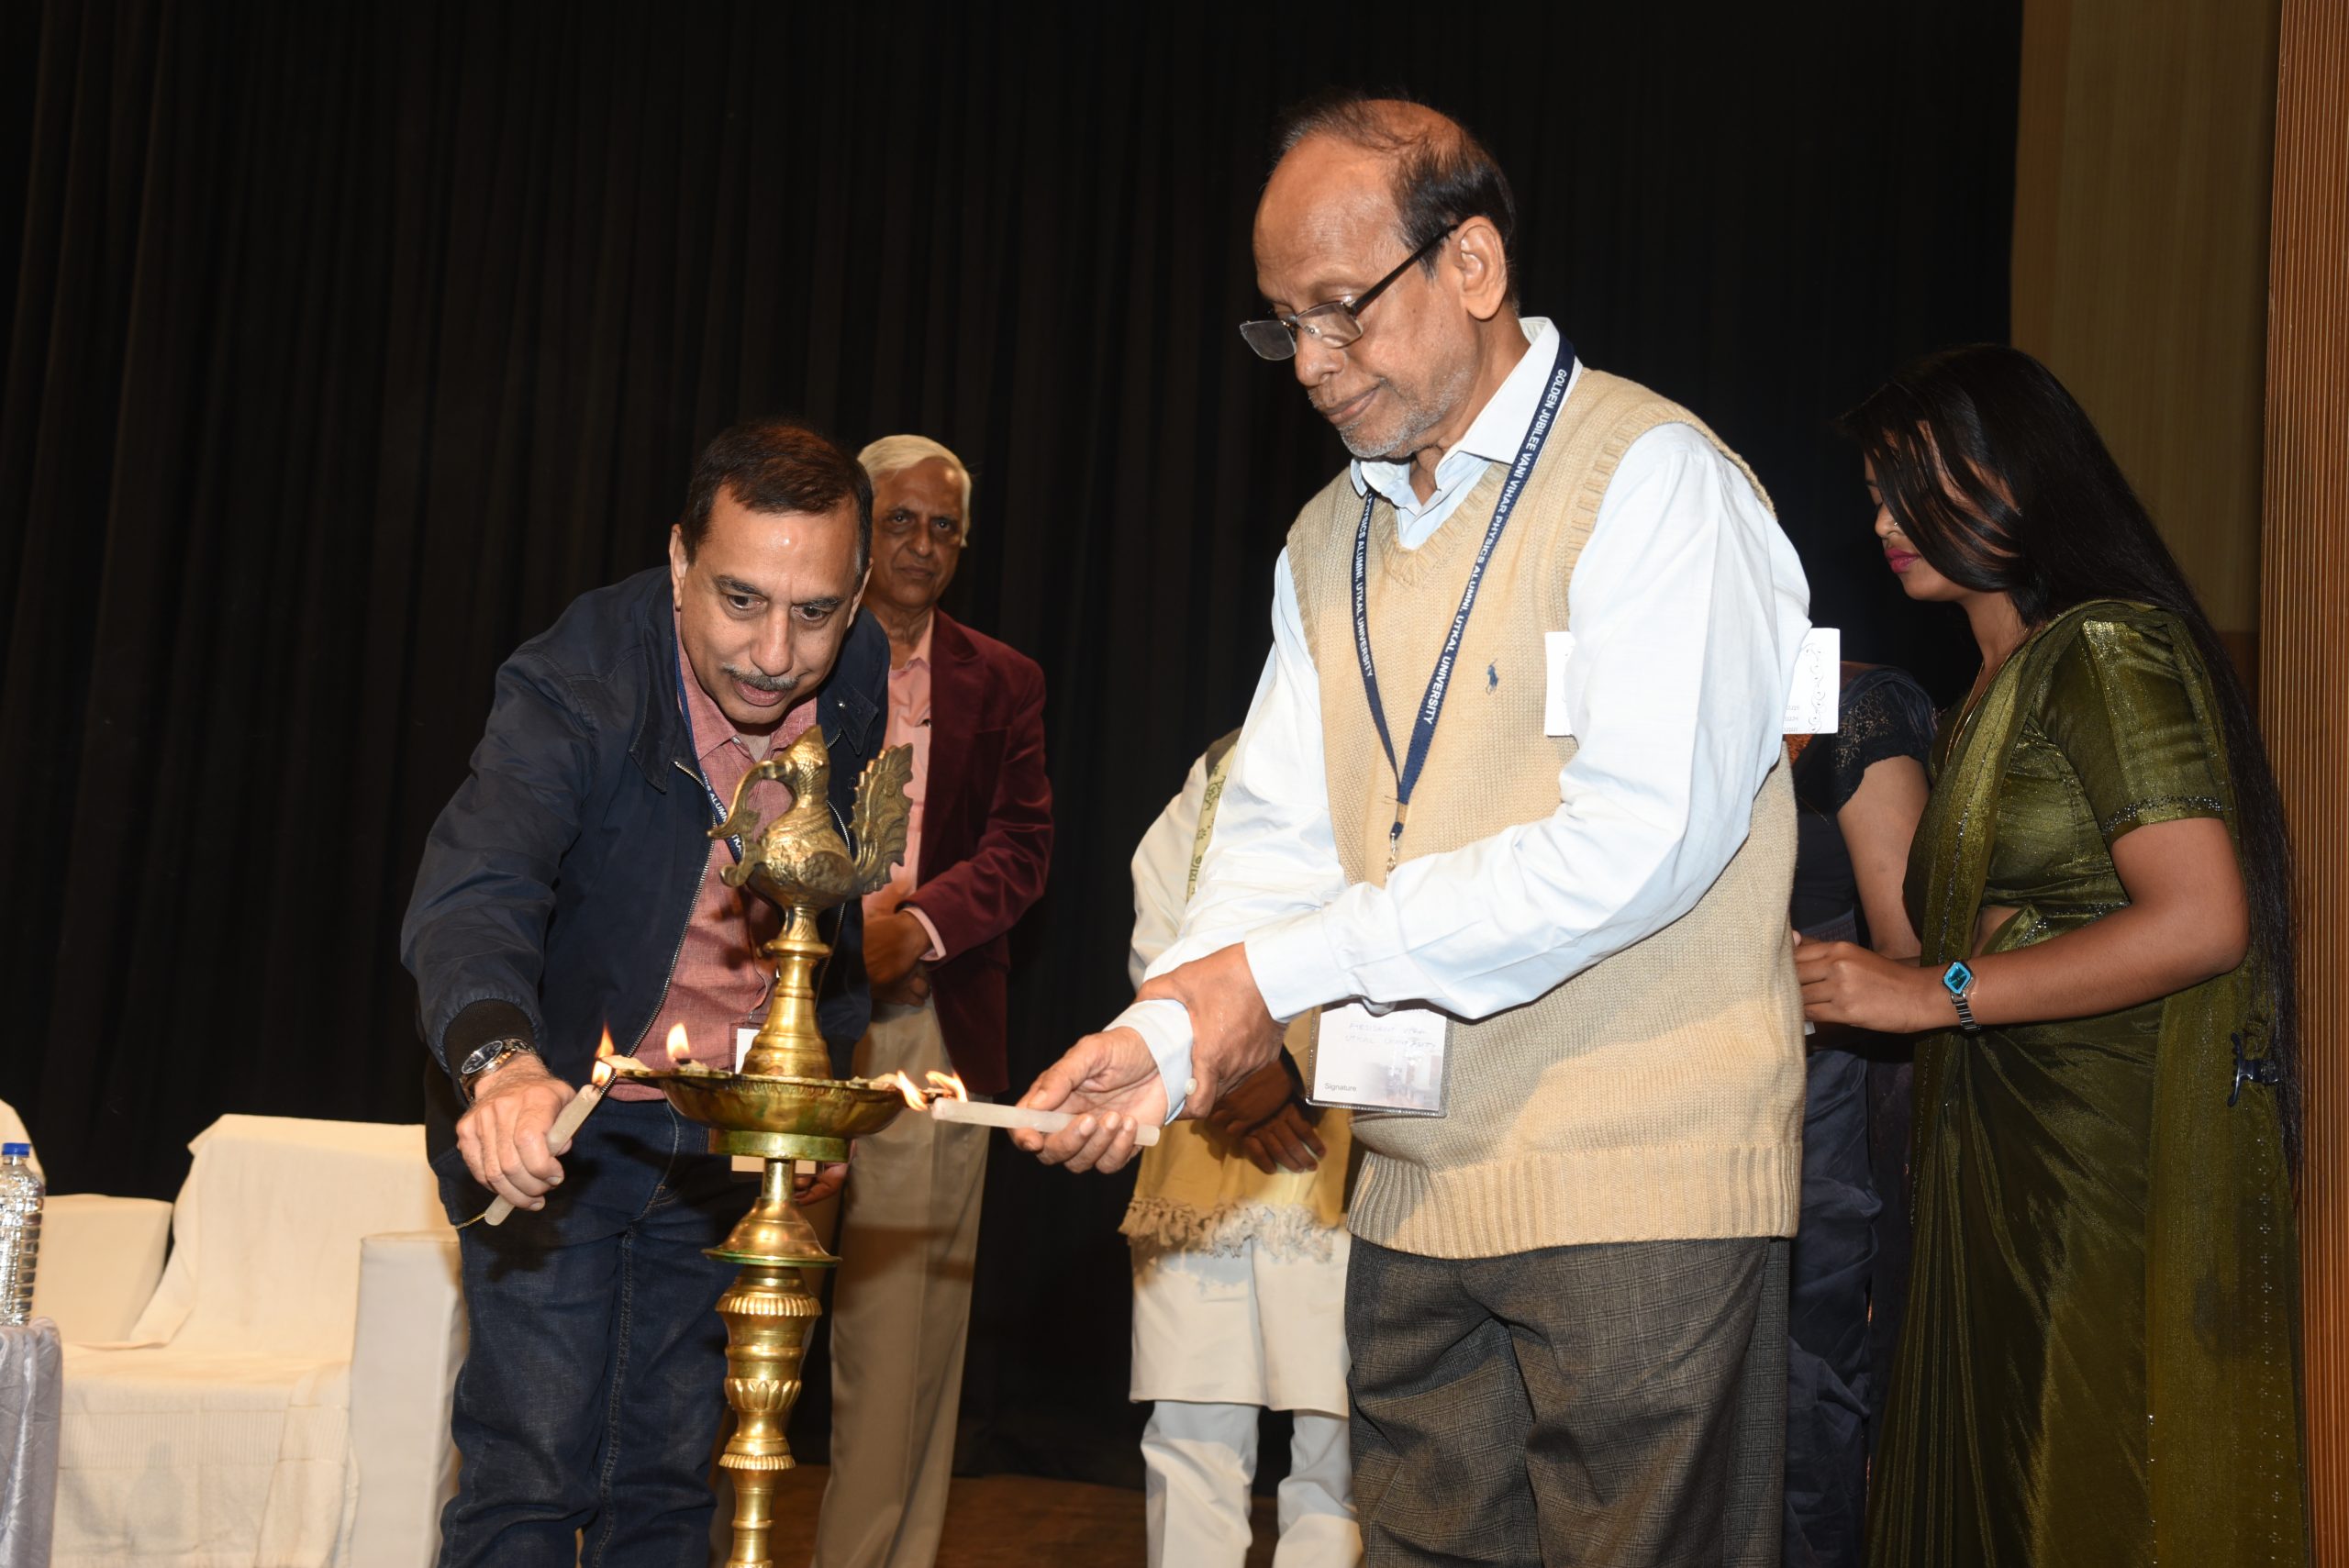 Golden Jubilee & National Conference on Advances in Physics-2023